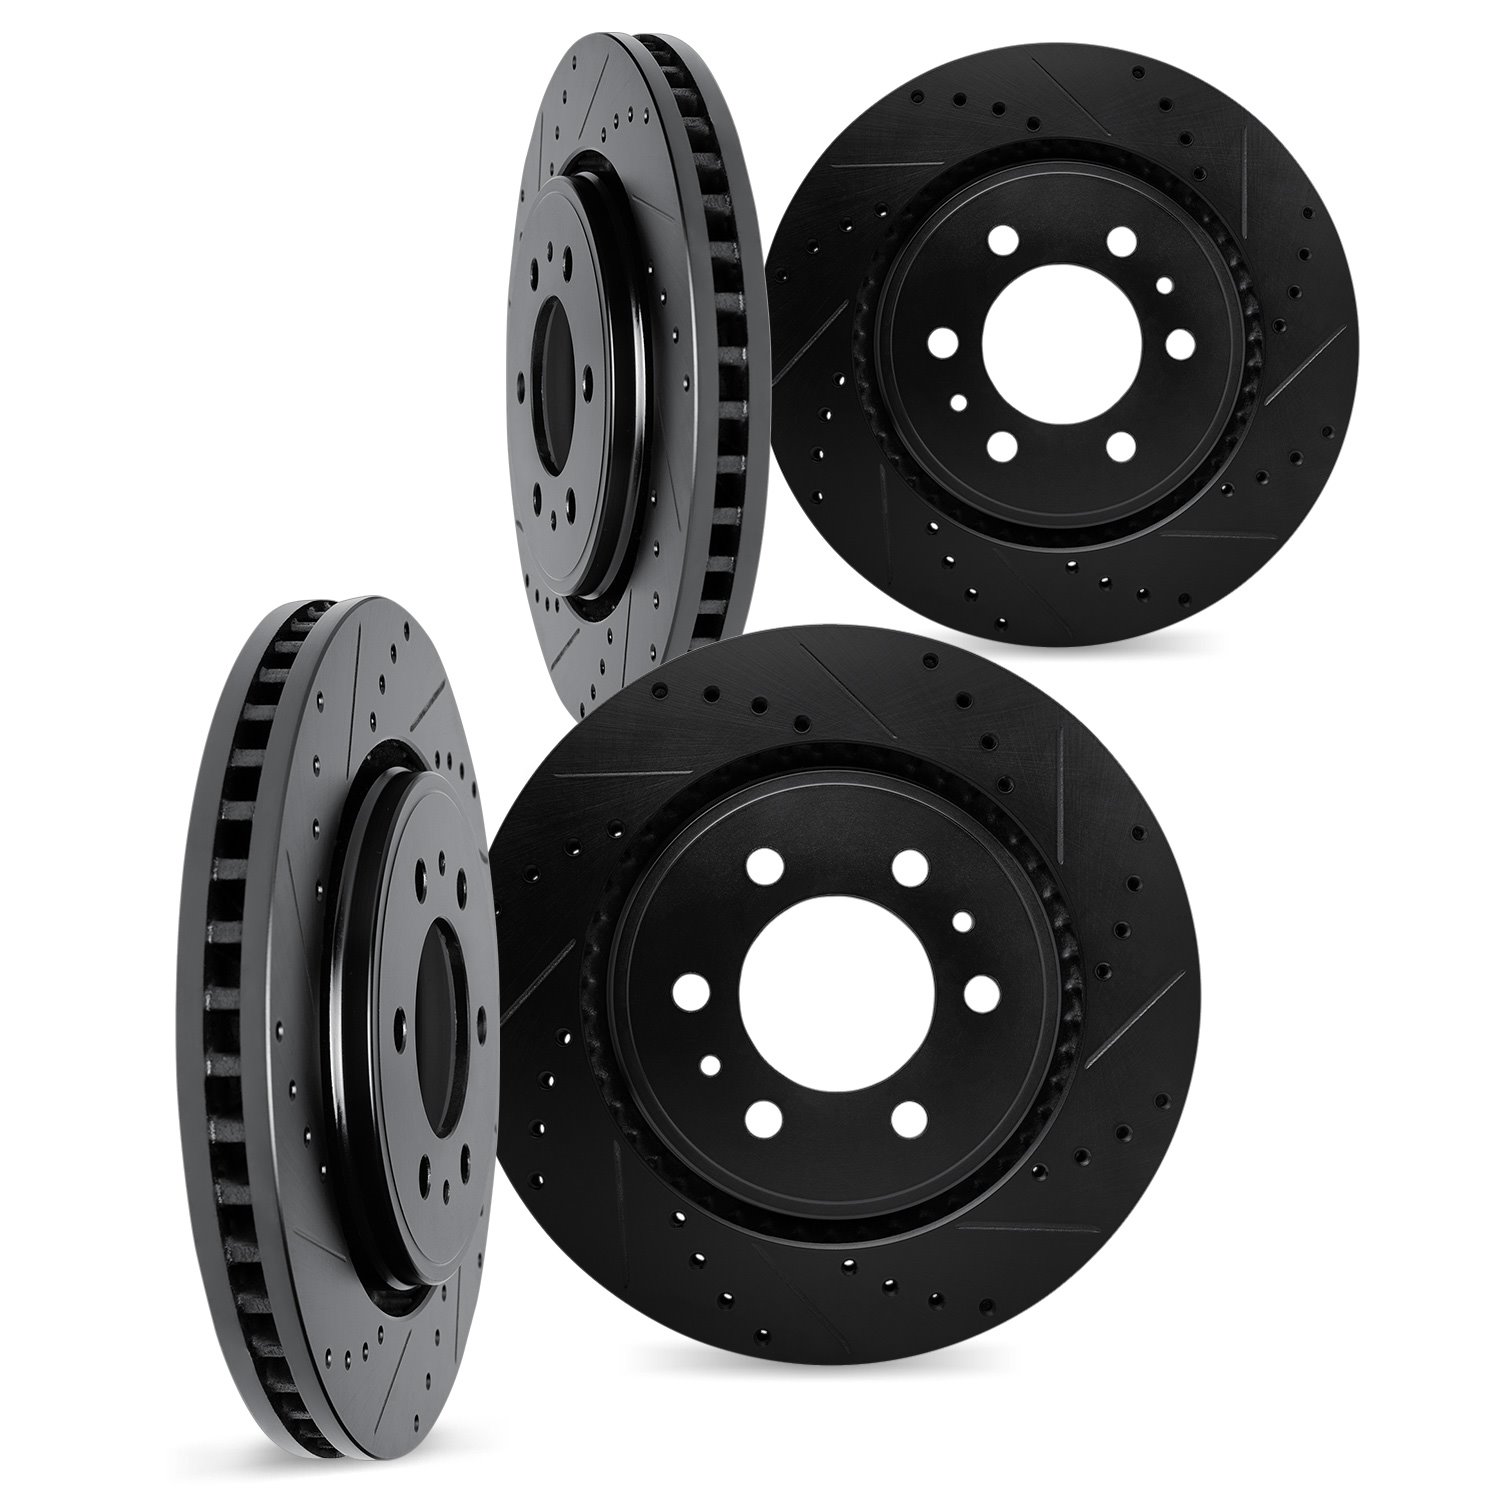 8004-76014 Drilled/Slotted Brake Rotors [Black], 2003-2009 Lexus/Toyota/Scion, Position: Front and Rear